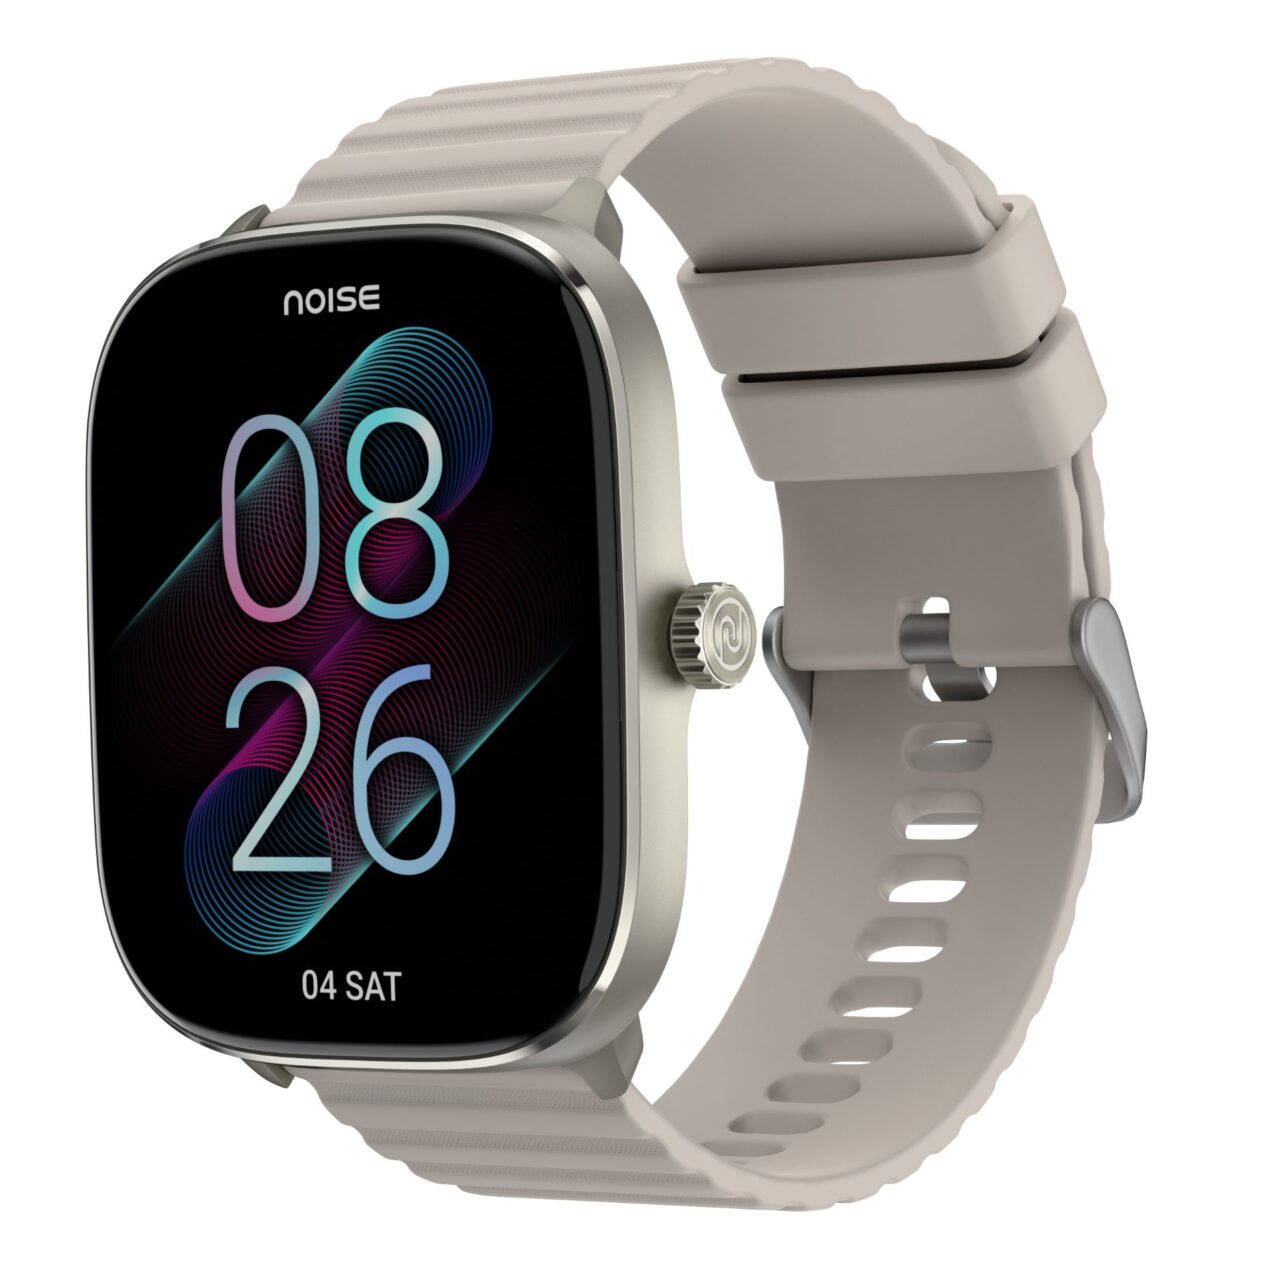 Noise ColorFit Macro Smartwatch Launched in India